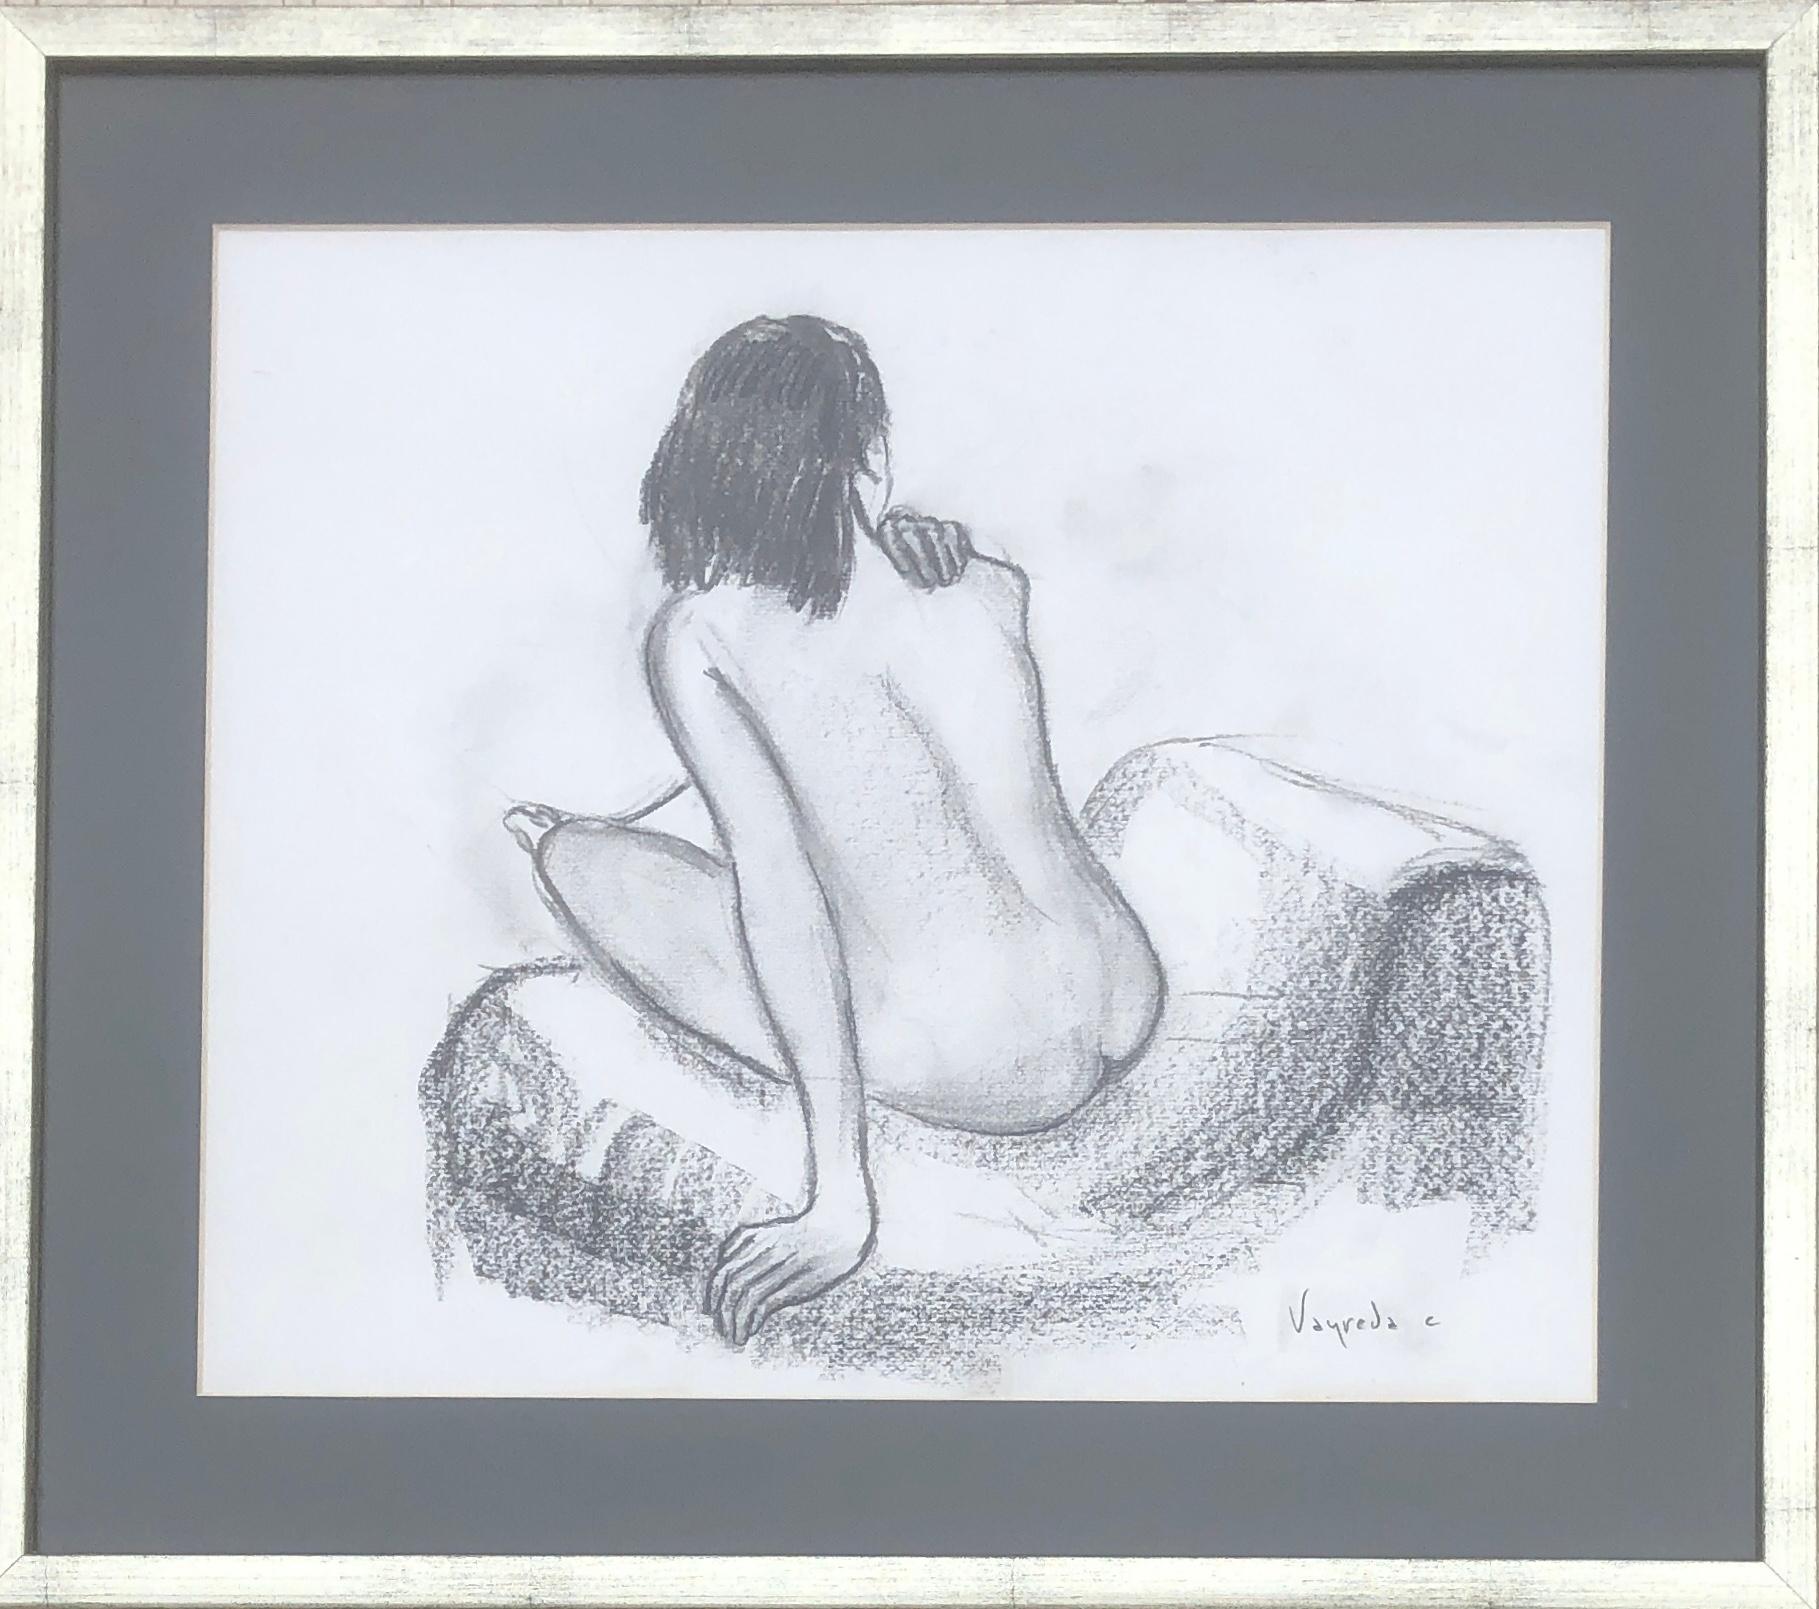 Female nude charcoal drawing - Art by Josep Maria Vayreda Canadell